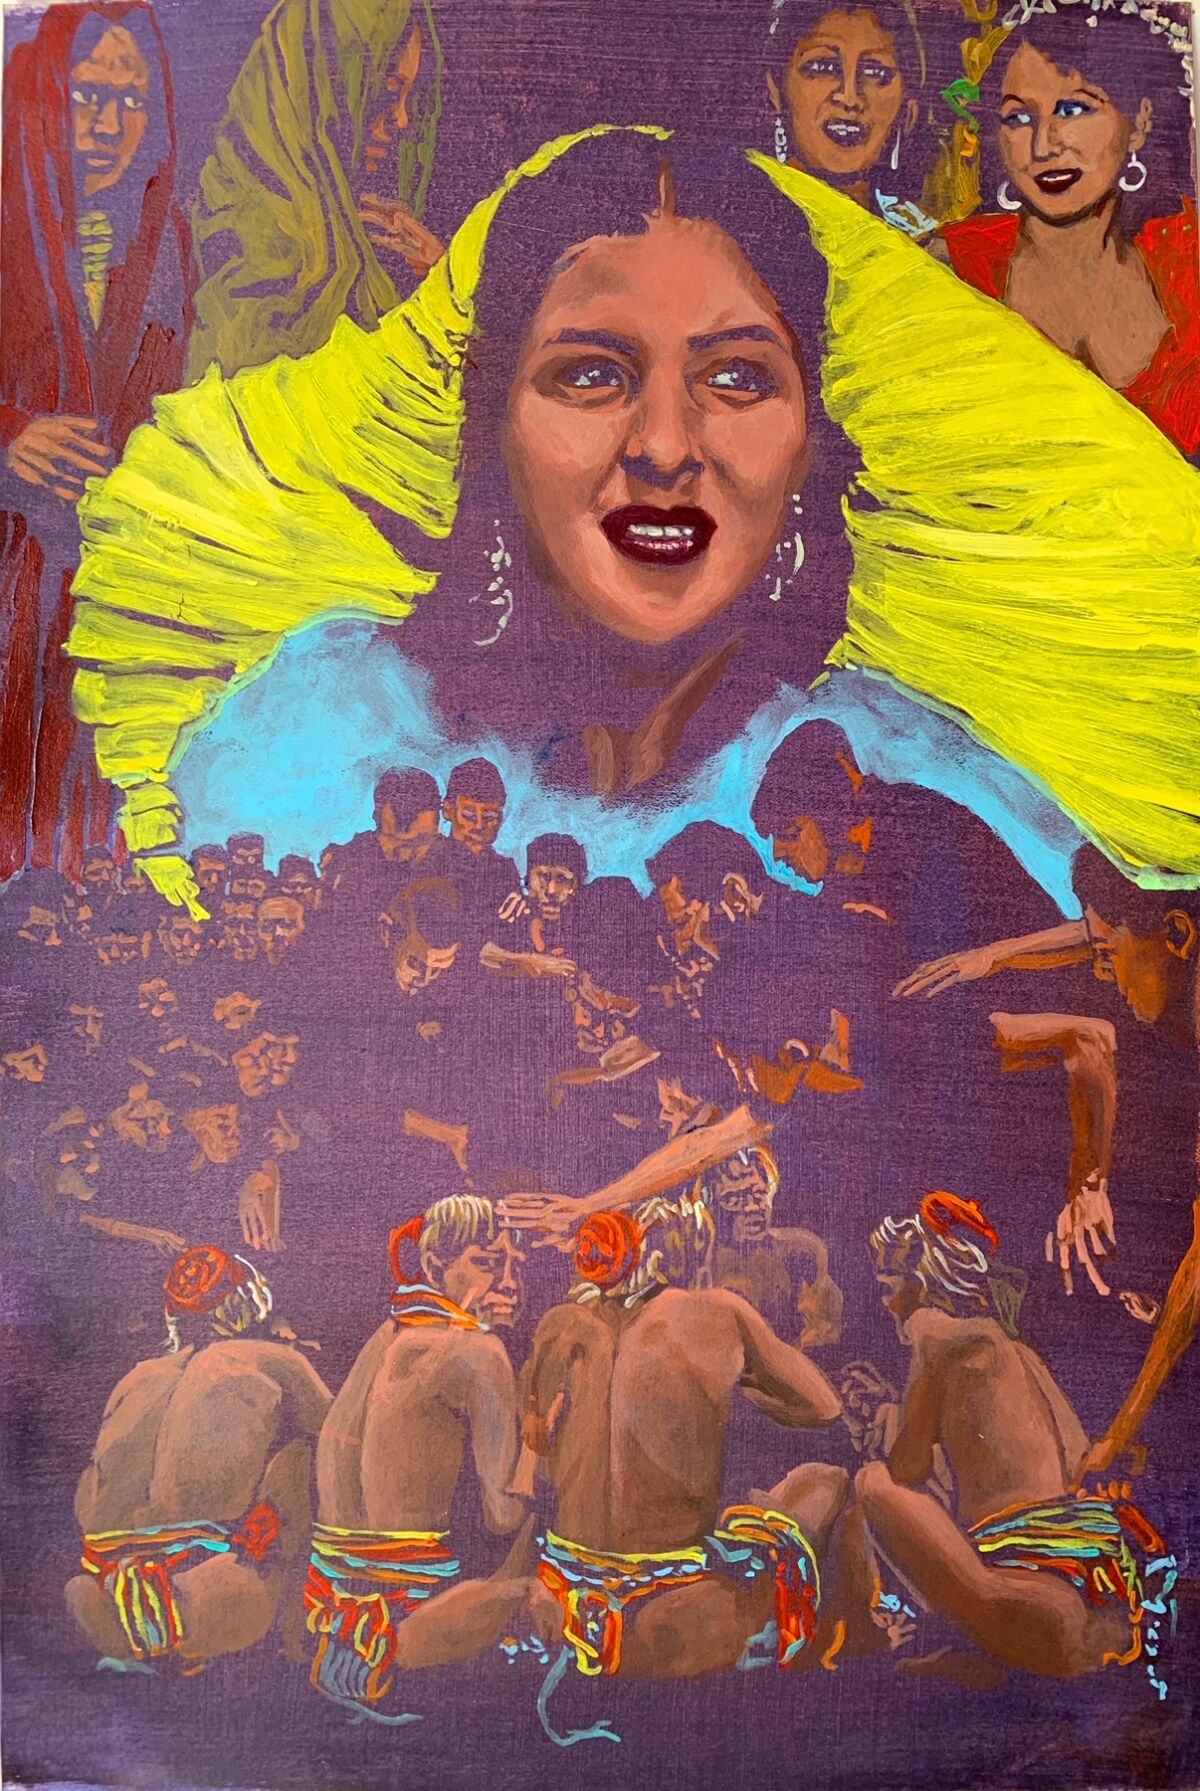 A painting shows a figure of a woman in bright Tehuana costume over a circle of Indigenous men